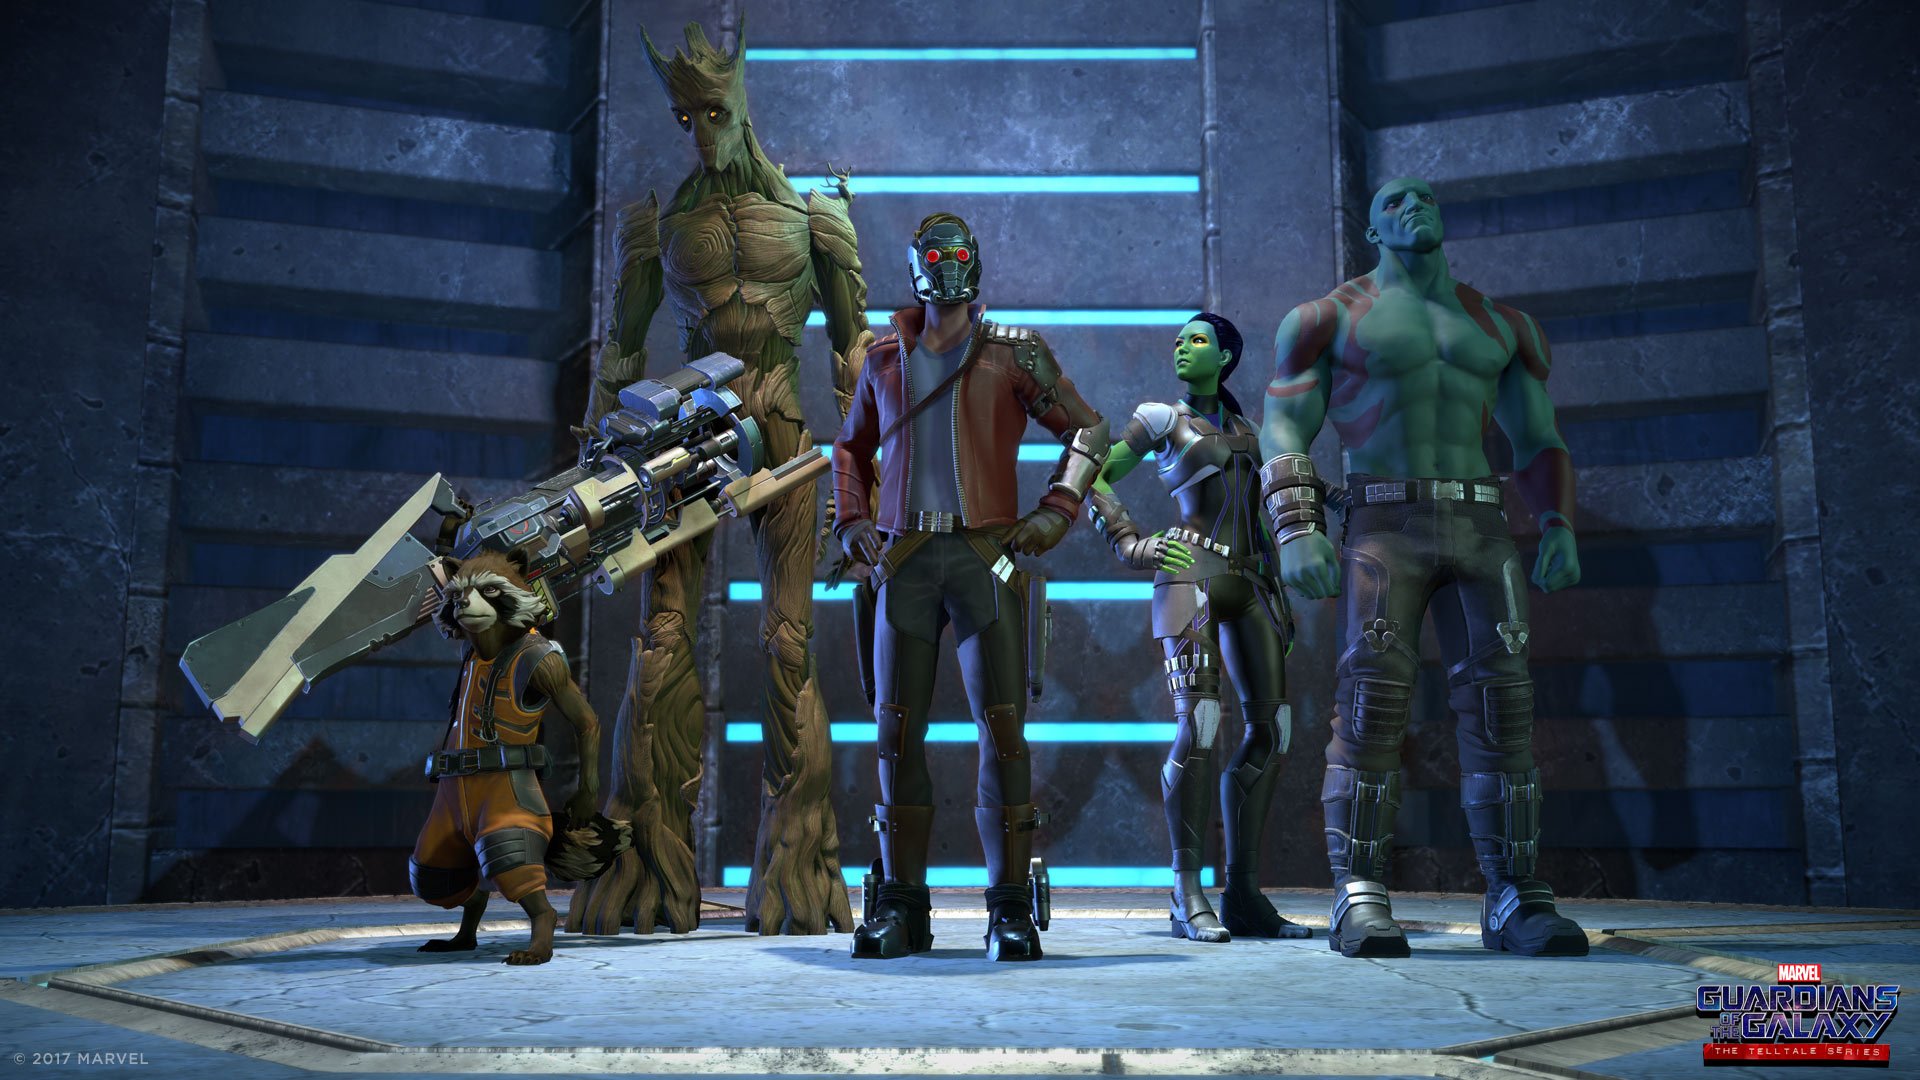 Marvel's Guardians of the Galaxy The Telltale Series 5